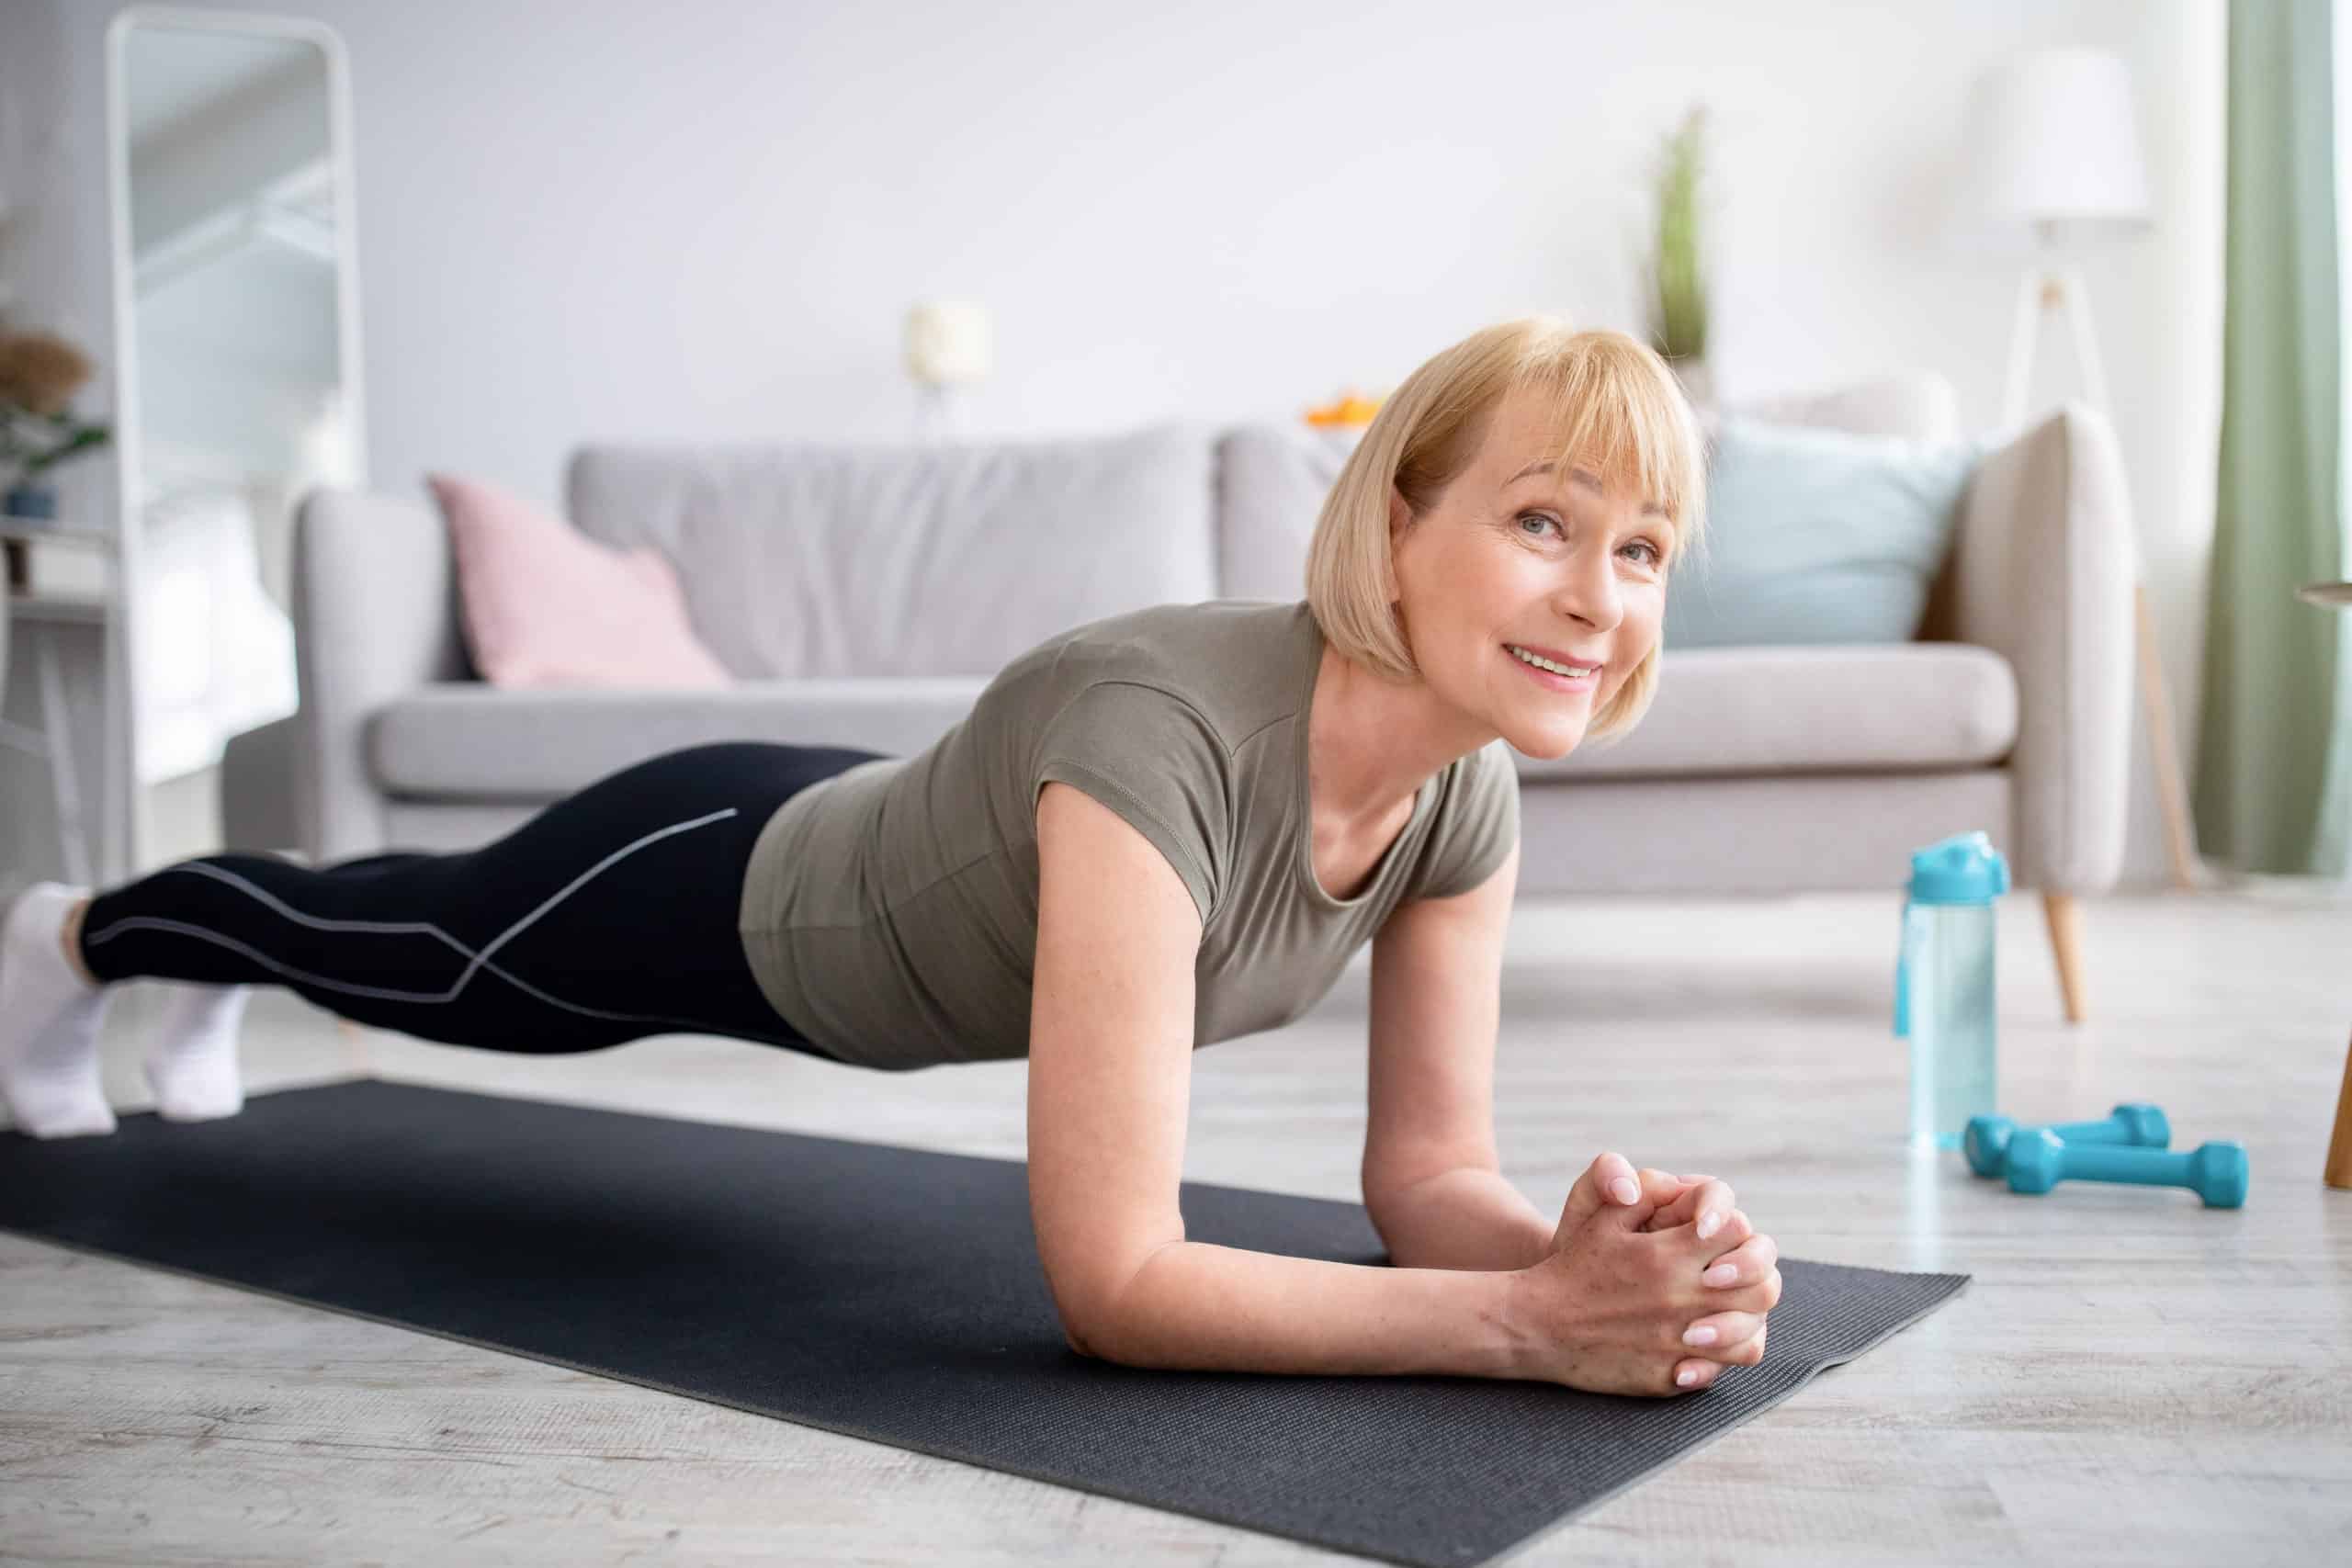 Core Exercises for Seniors: Training The Core for Older Populations